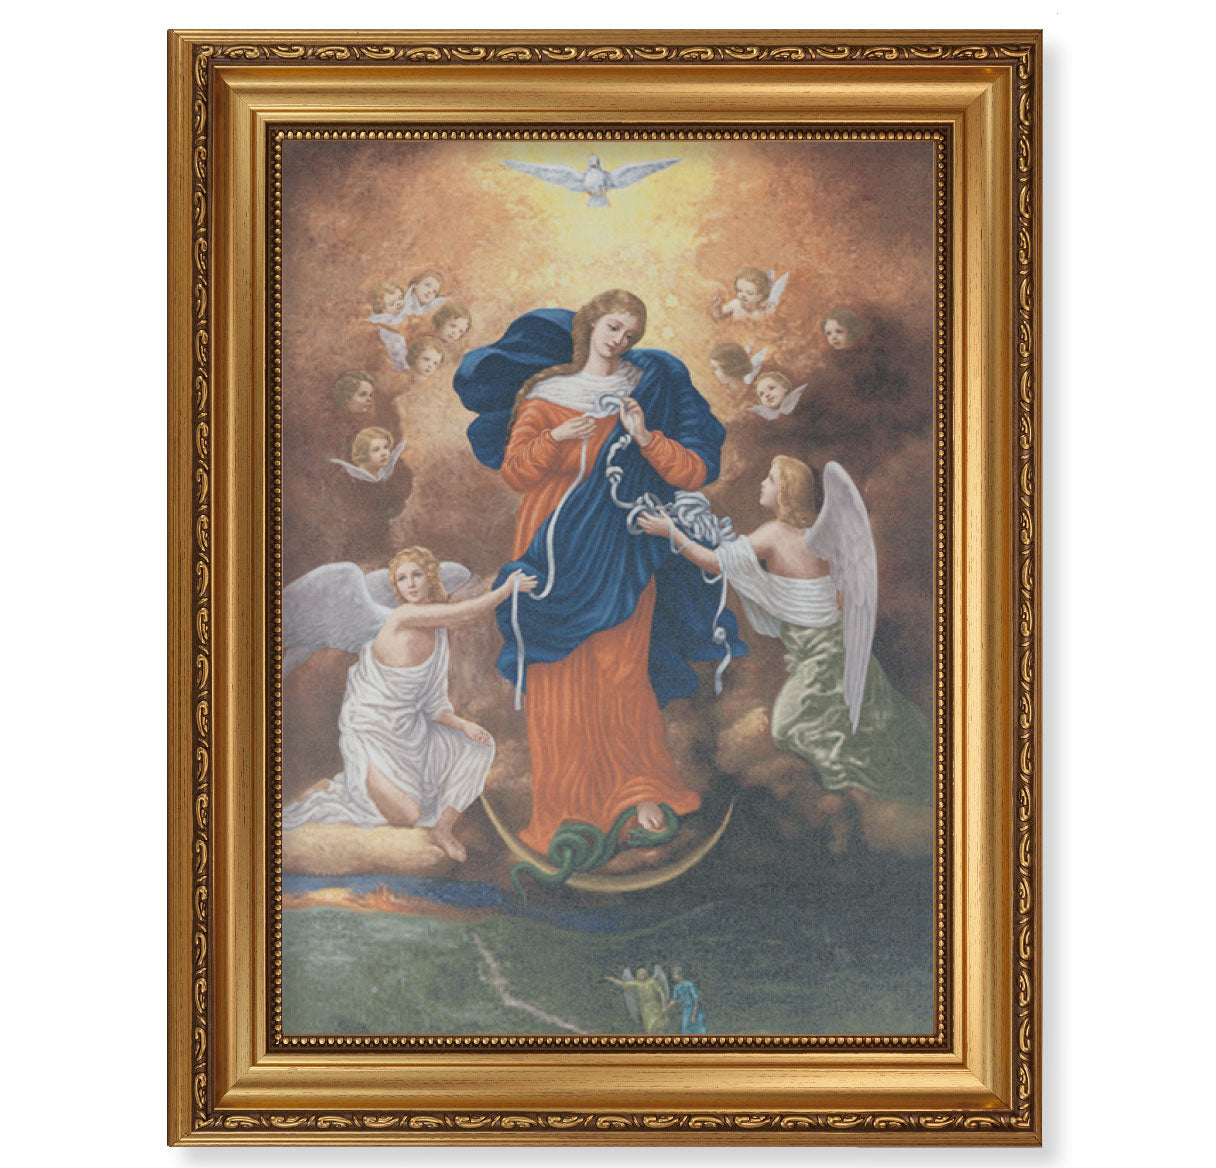 Our Lady Untier of Knots Gold Wood Framed Canvas Art